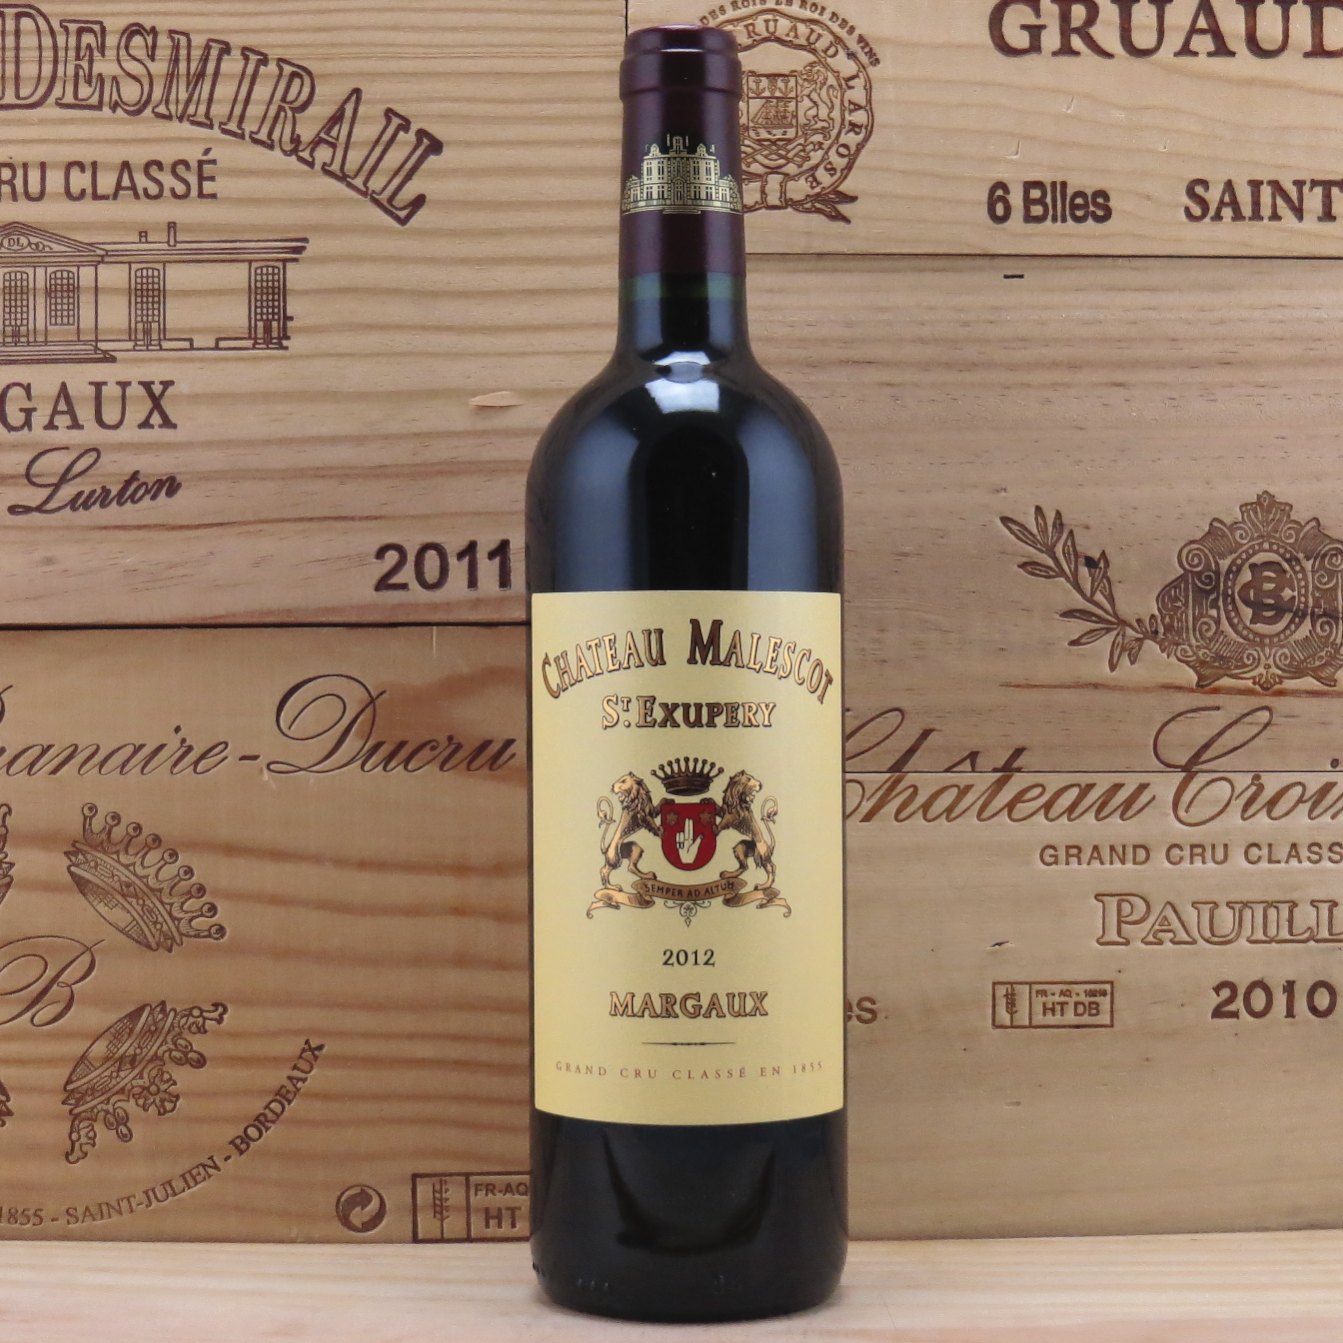 2012 Chateau Malescot St. Exupery